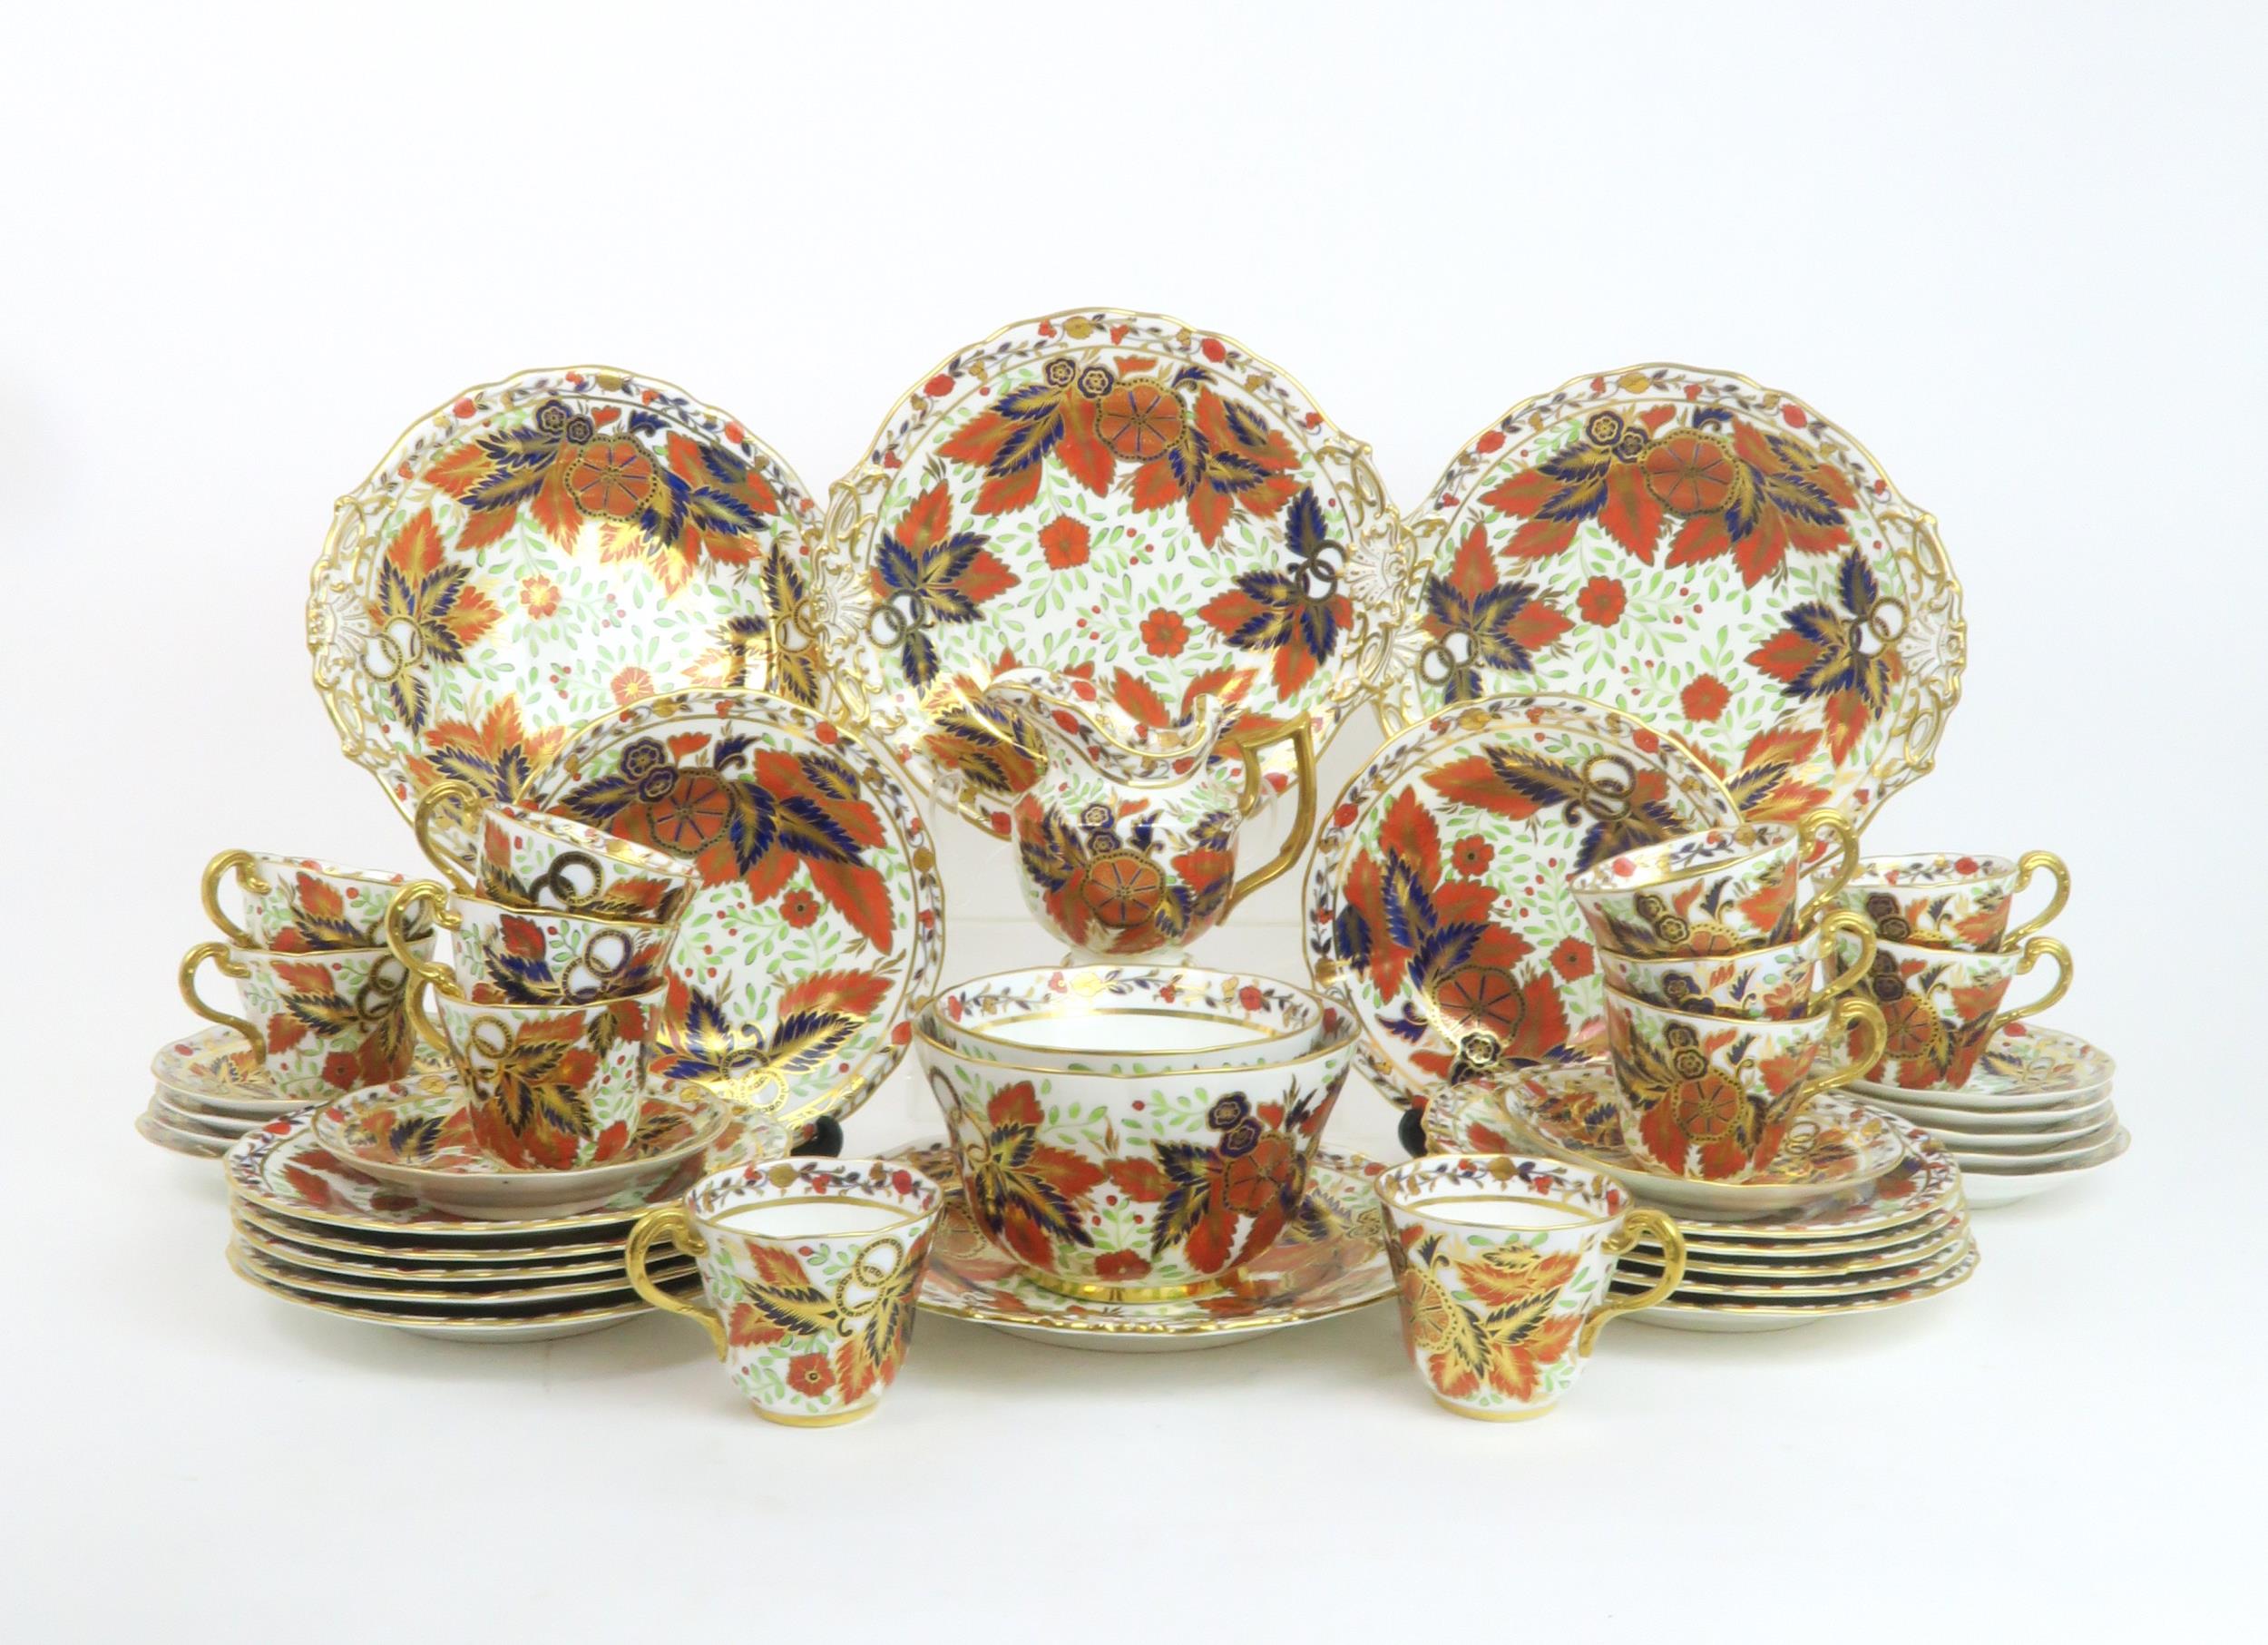 A LATE 19TH CENTURY COPELAND TEA SERVICE in pattern 1559, decorated in the imari palette with leaves